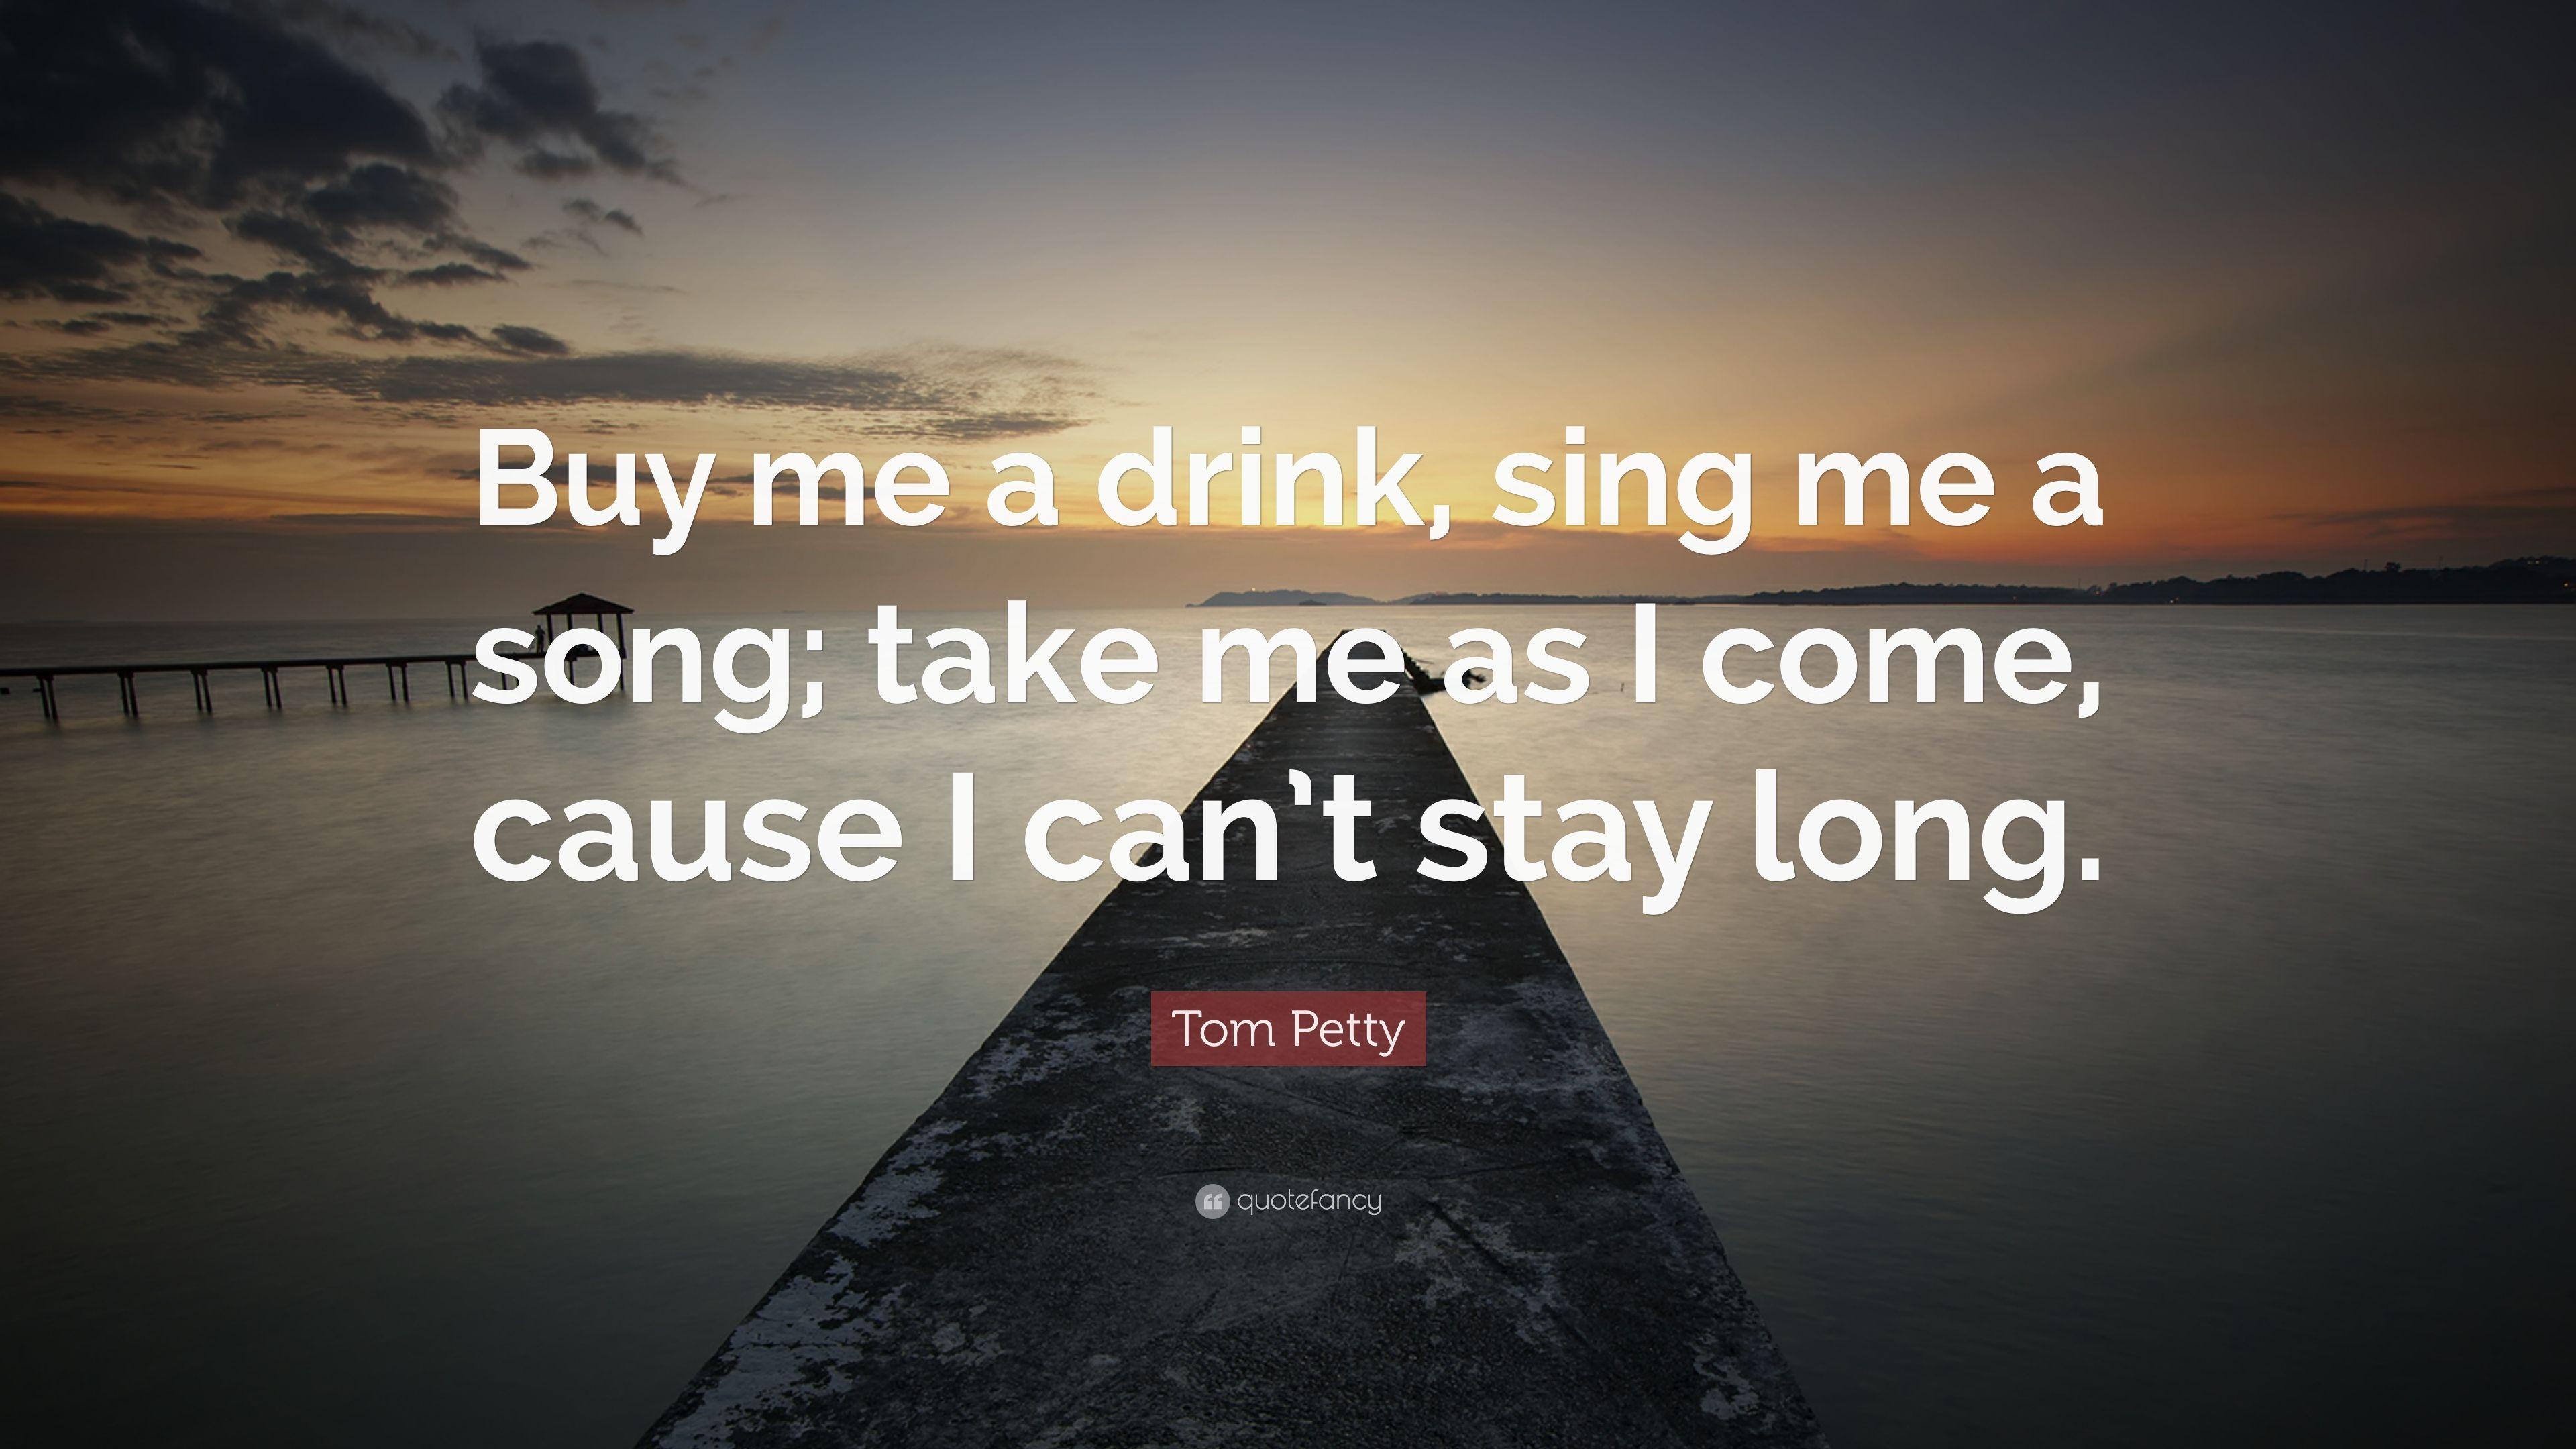 Tom Petty Quote: "Buy me a drink, sing me a song; take me as I come 